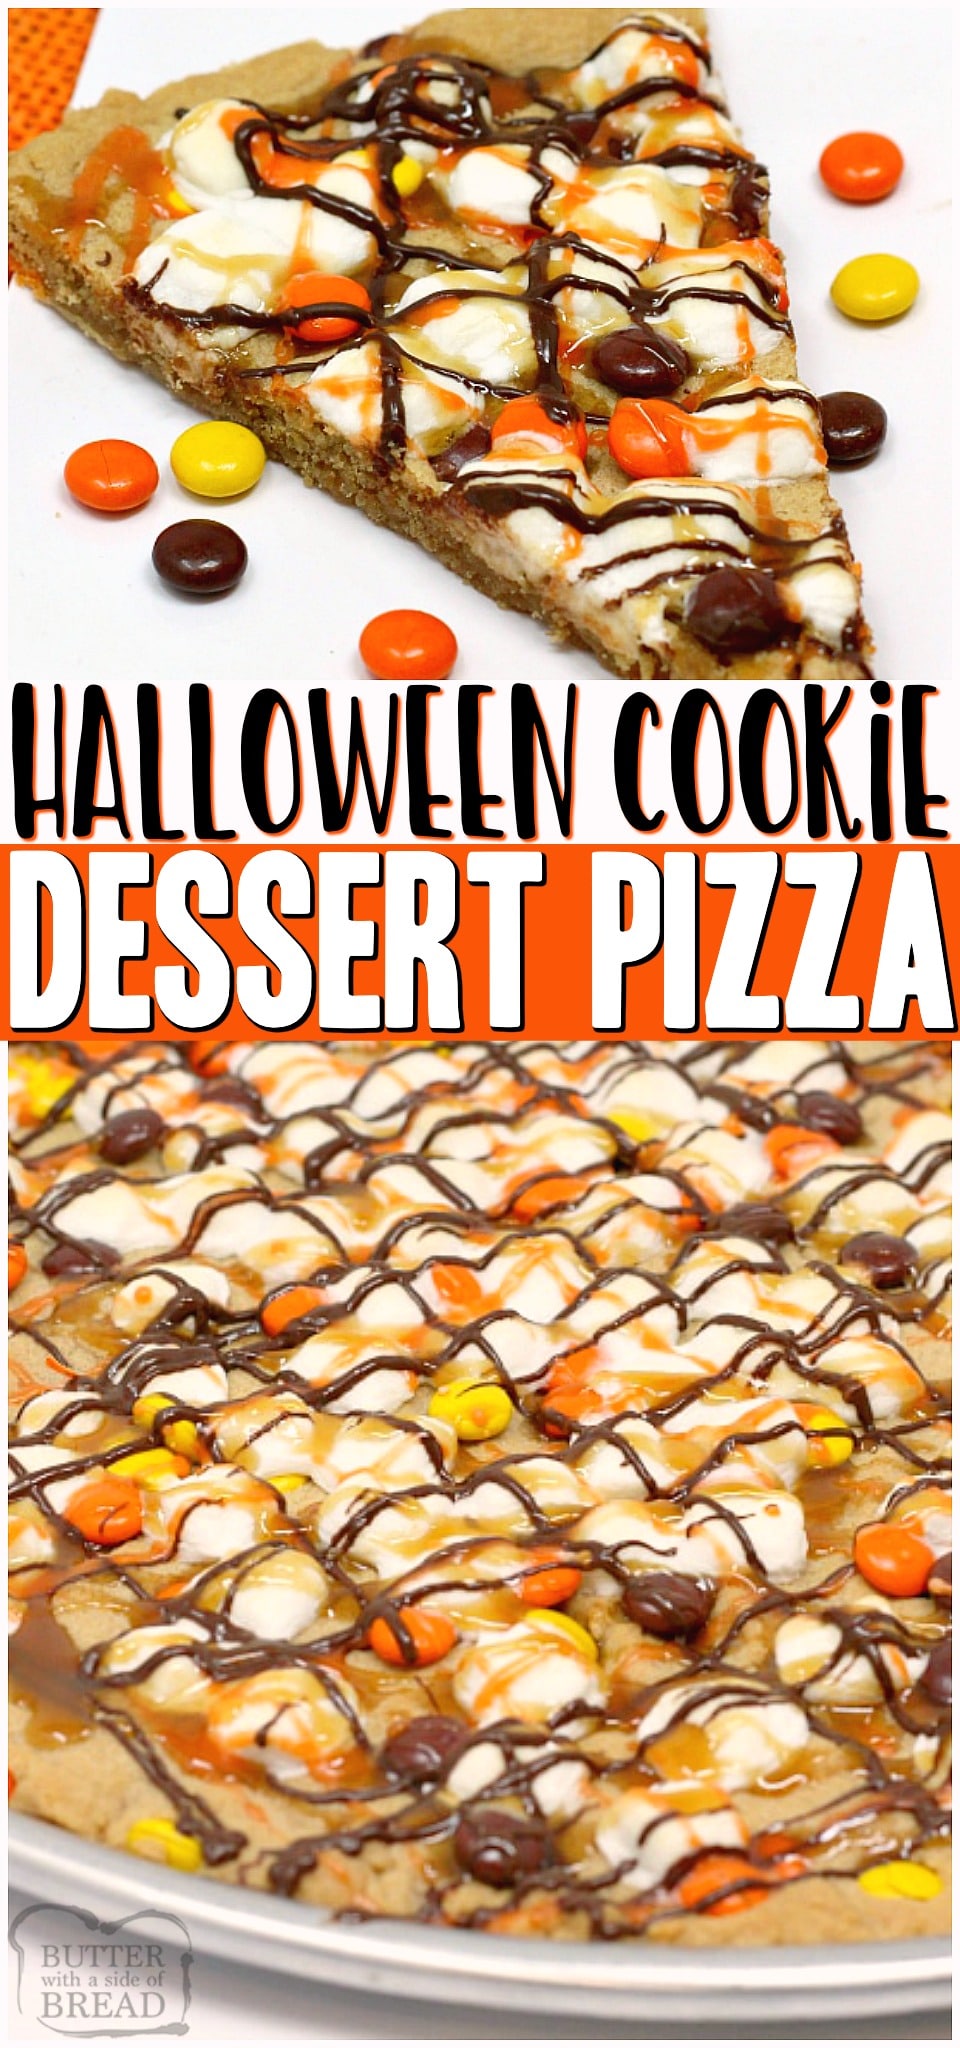 Halloween Peanut Butter Cookie Pizza is made with a delicious peanut butter cookie crust that is topped with marshmallows and Reese's Pieces and then drizzled with chocolate, caramel and orange icing! The perfect Halloween dessert! #cookie #pizza #Halloween #peanutbutter #dessert #baking #easyrecipe from BUTTER WITH A SIDE OF BREAD